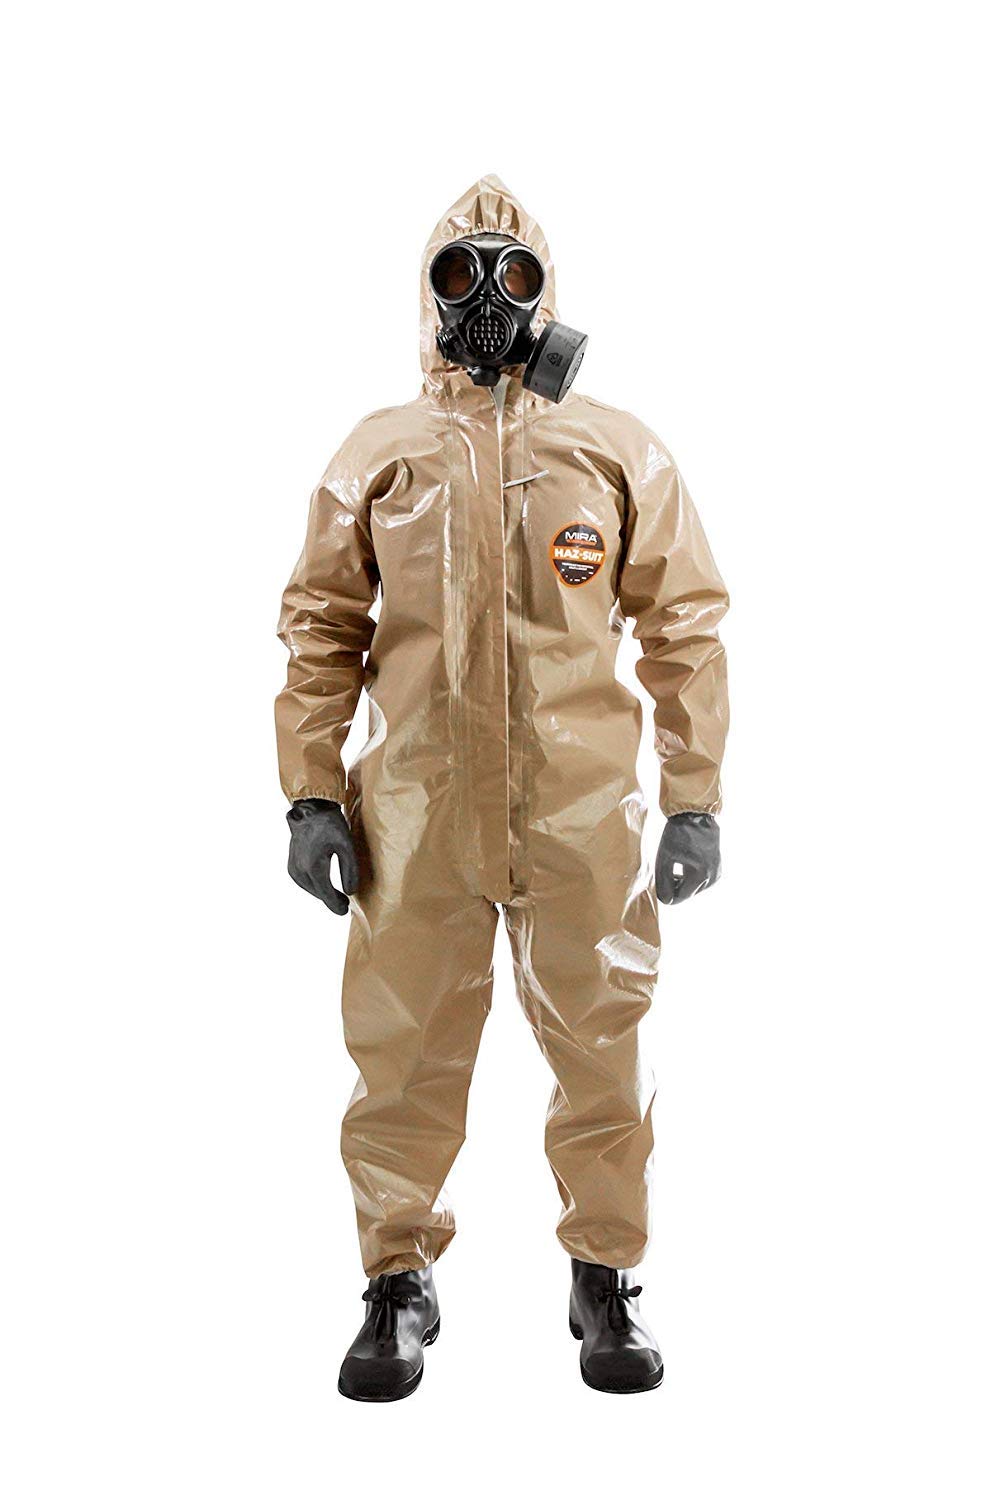 MIRA SAFETY Suit Disposable Protective Coverall with Hood and Elastic Cuff (2X/3X)